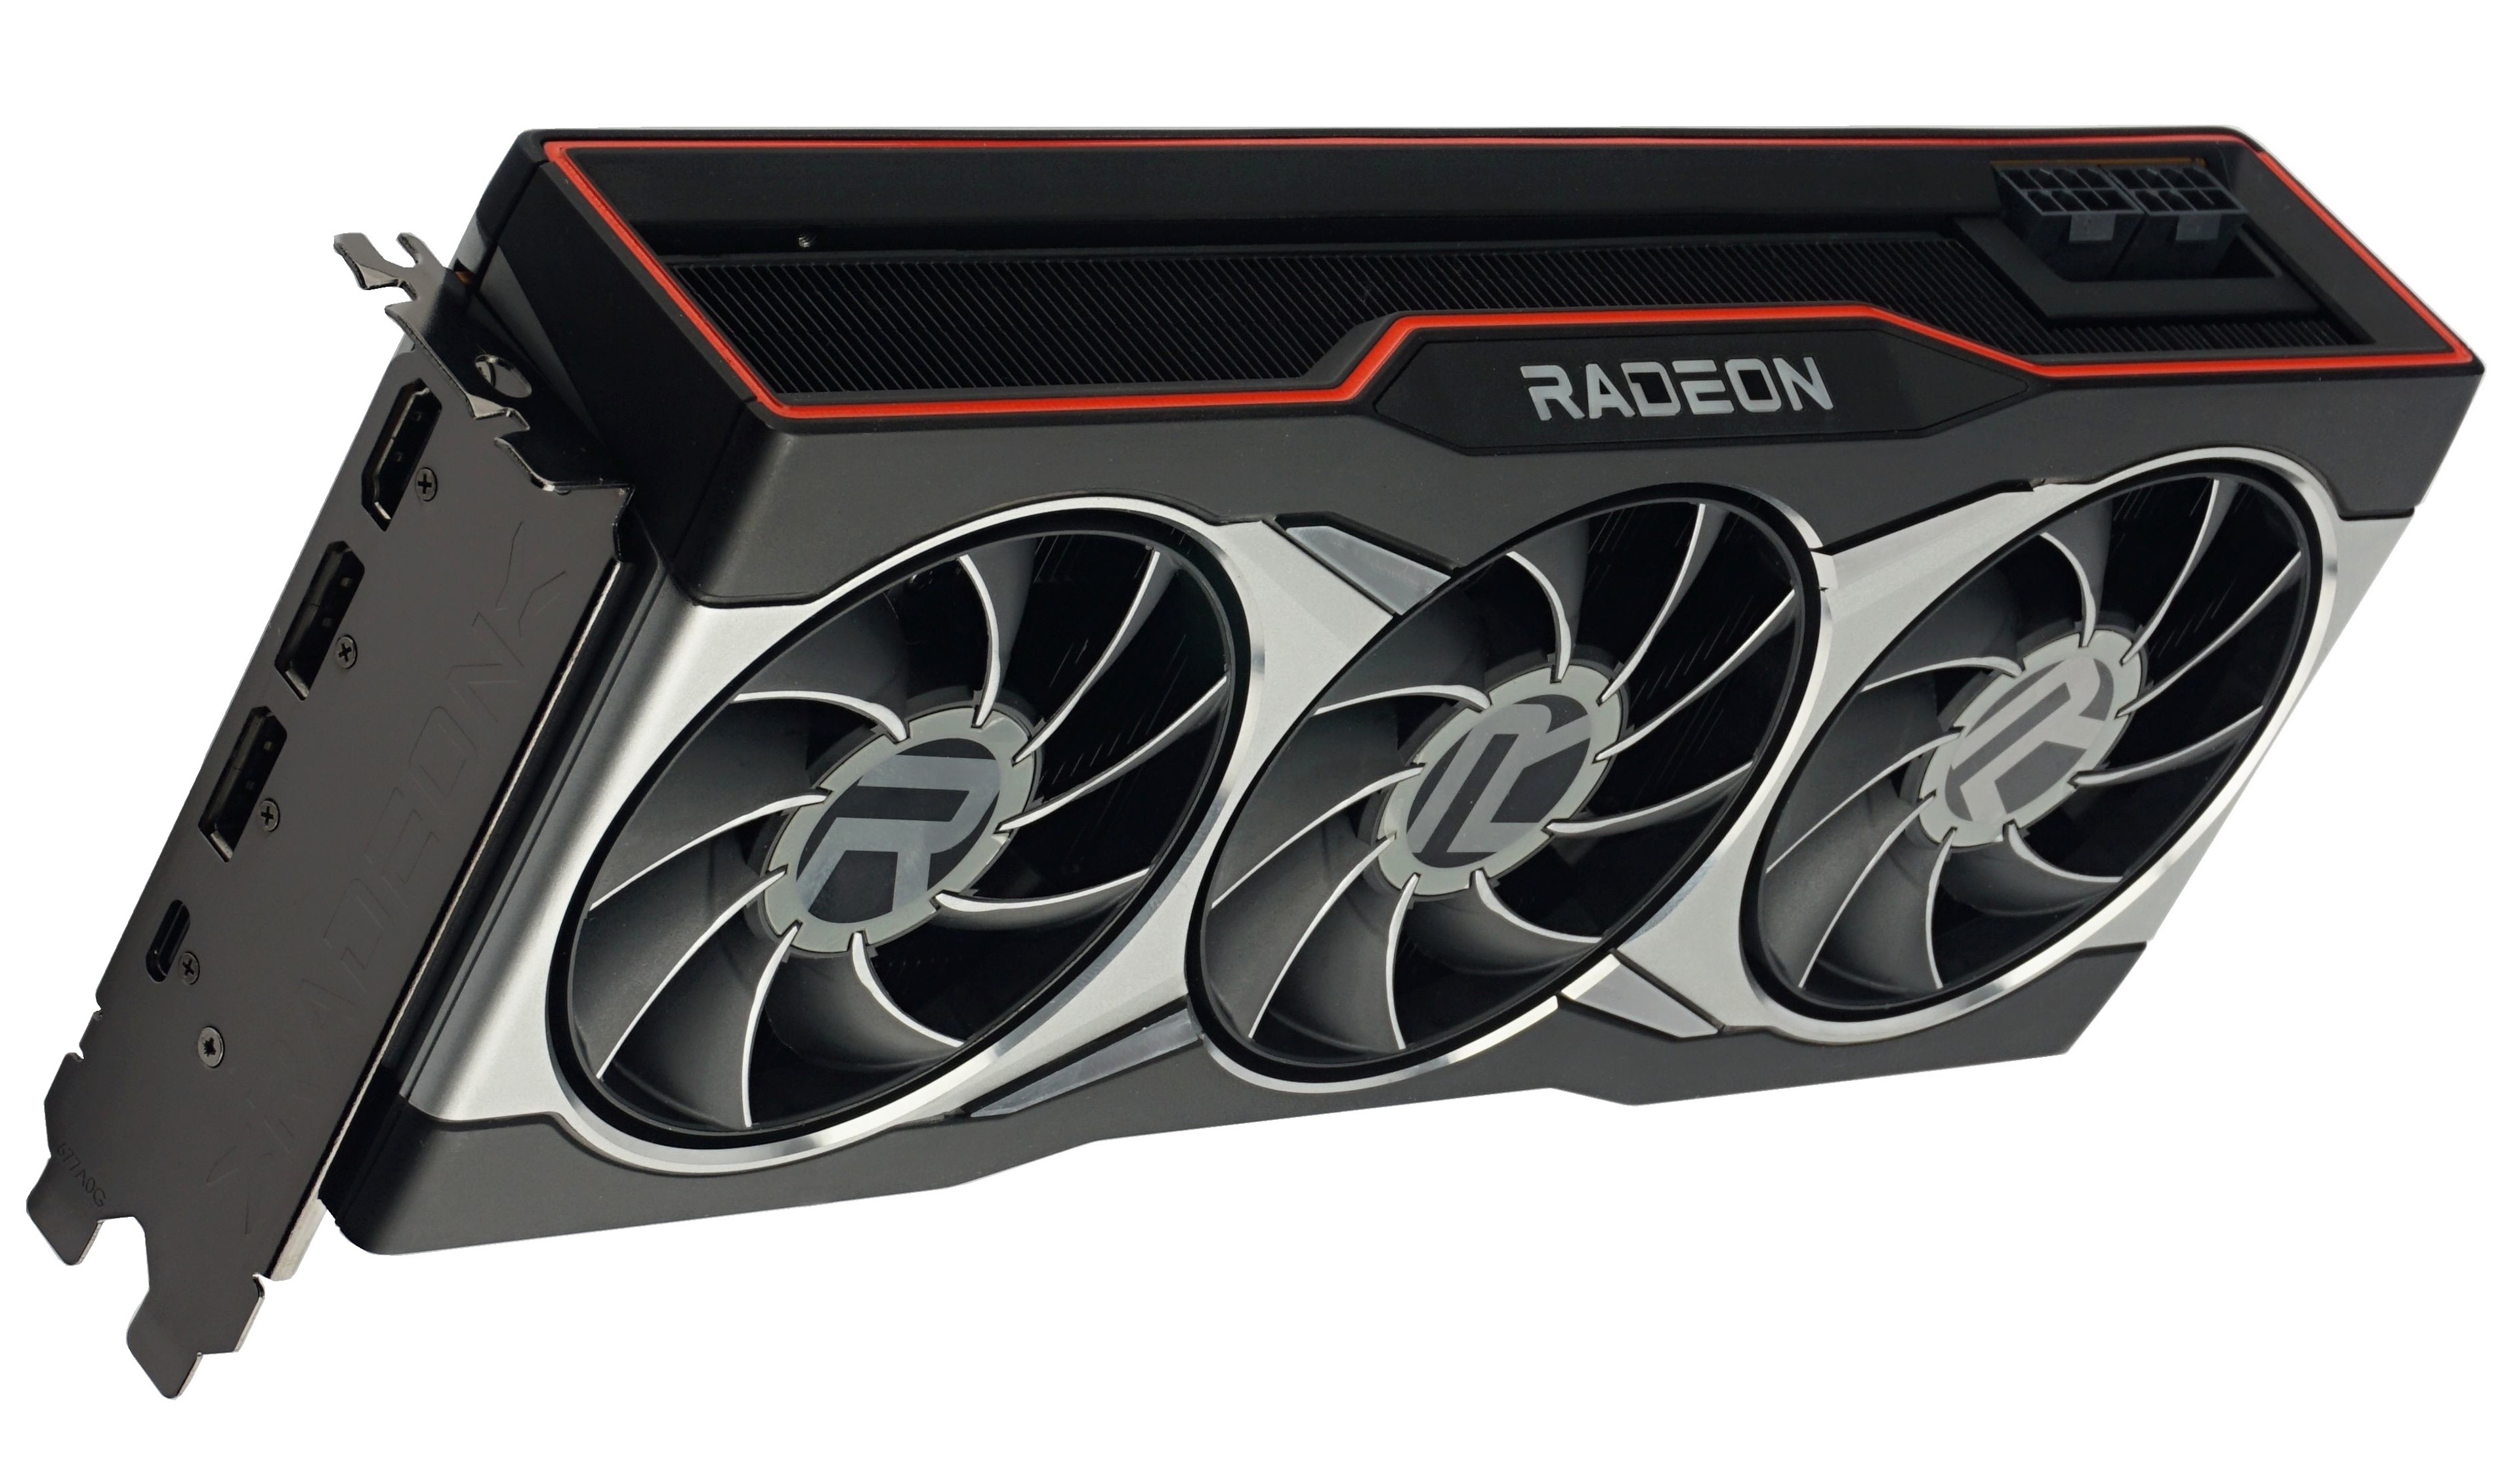 AMD Radeon RX 6800 XT Review - NVIDIA is in Trouble - Circuit